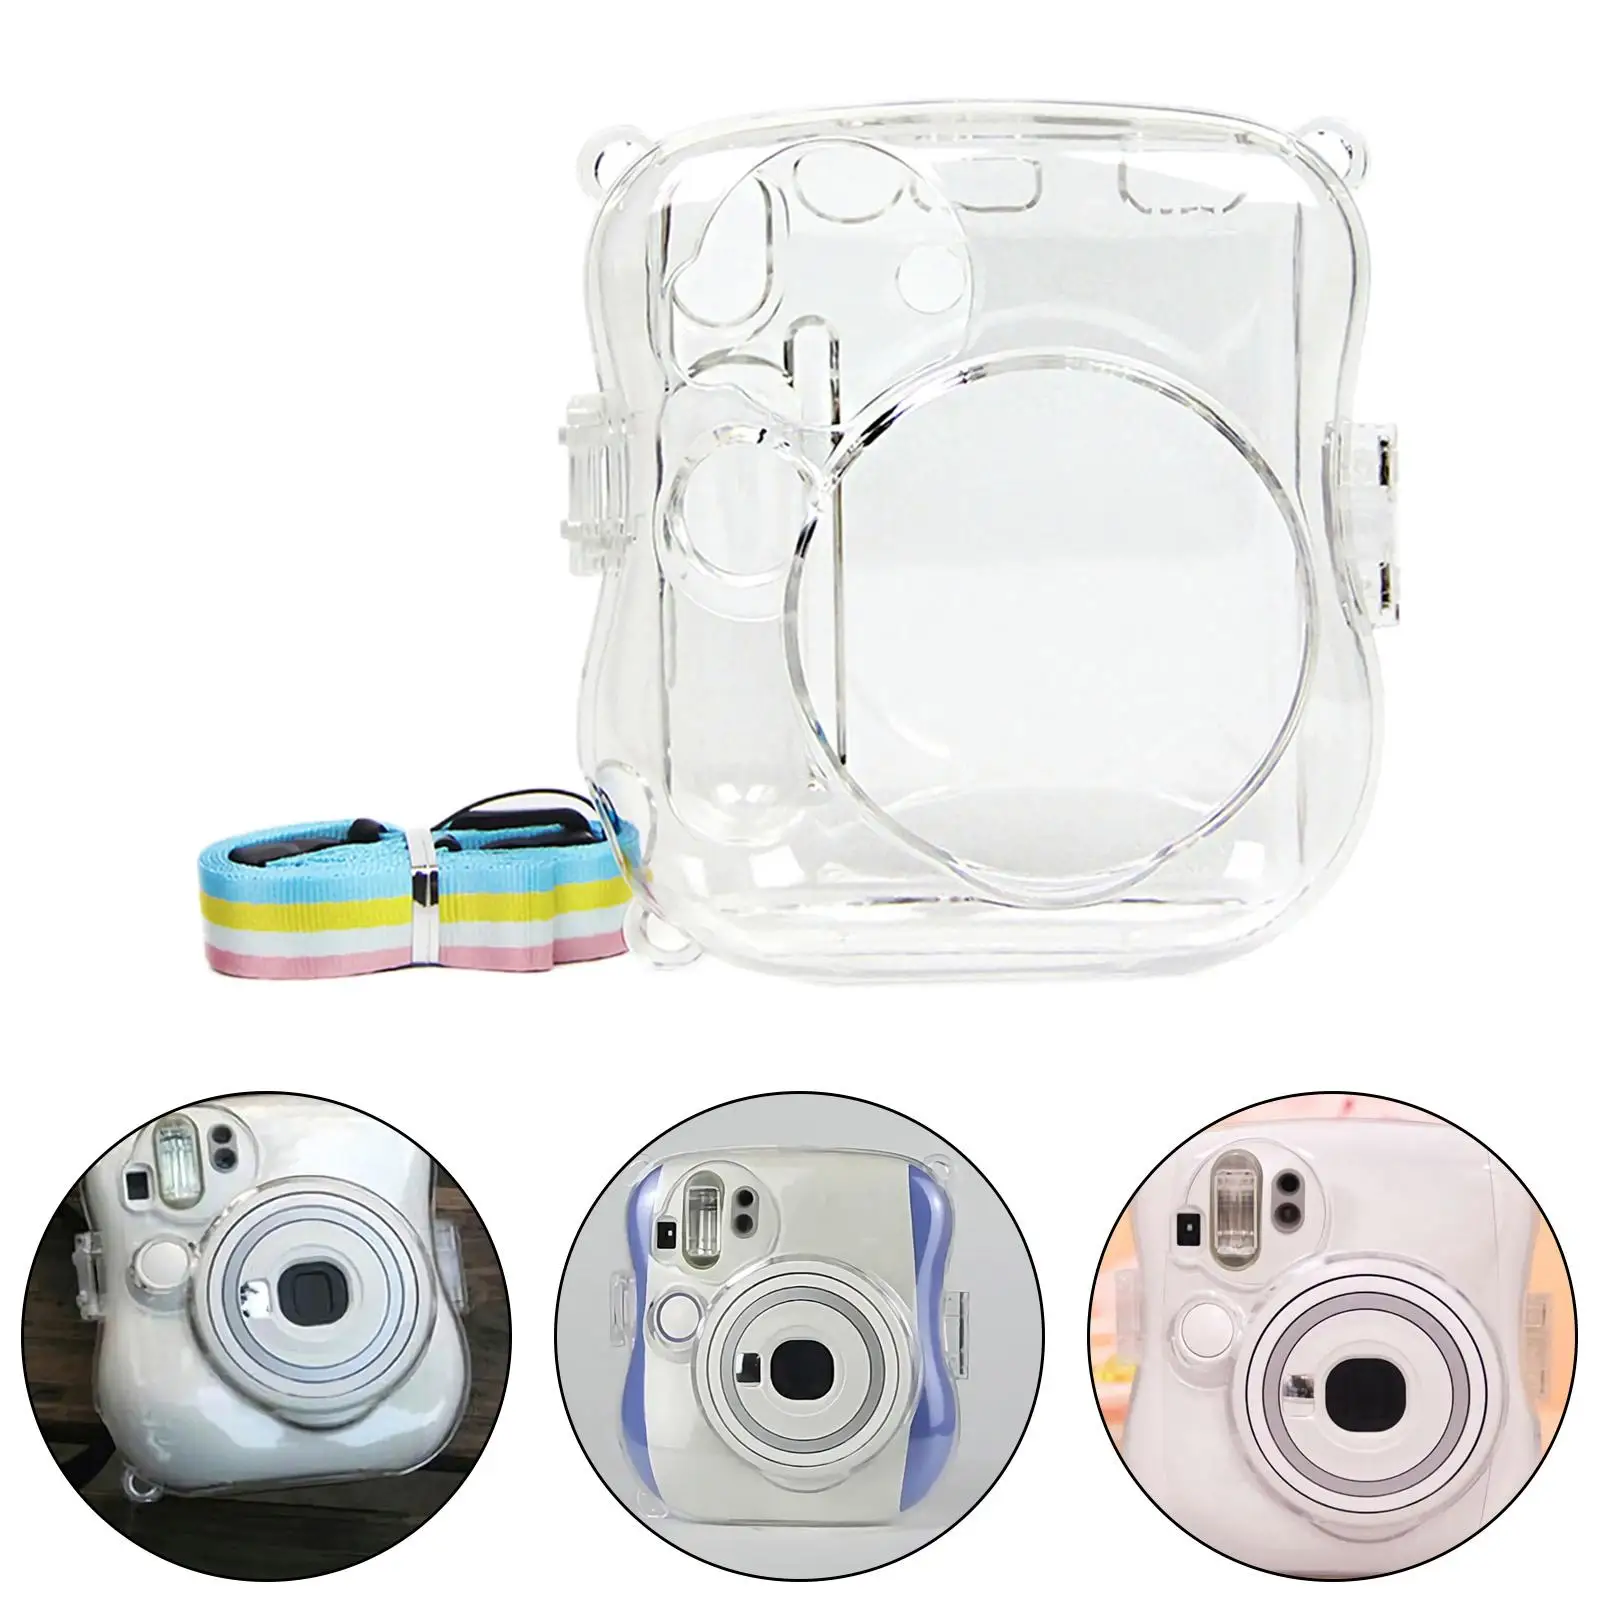 Crystal Camera Protective Case W/ Rainbow Shoulder Strap Transparent Premium Cover Shell Bag for Instax Mini 25 Holiday Travel